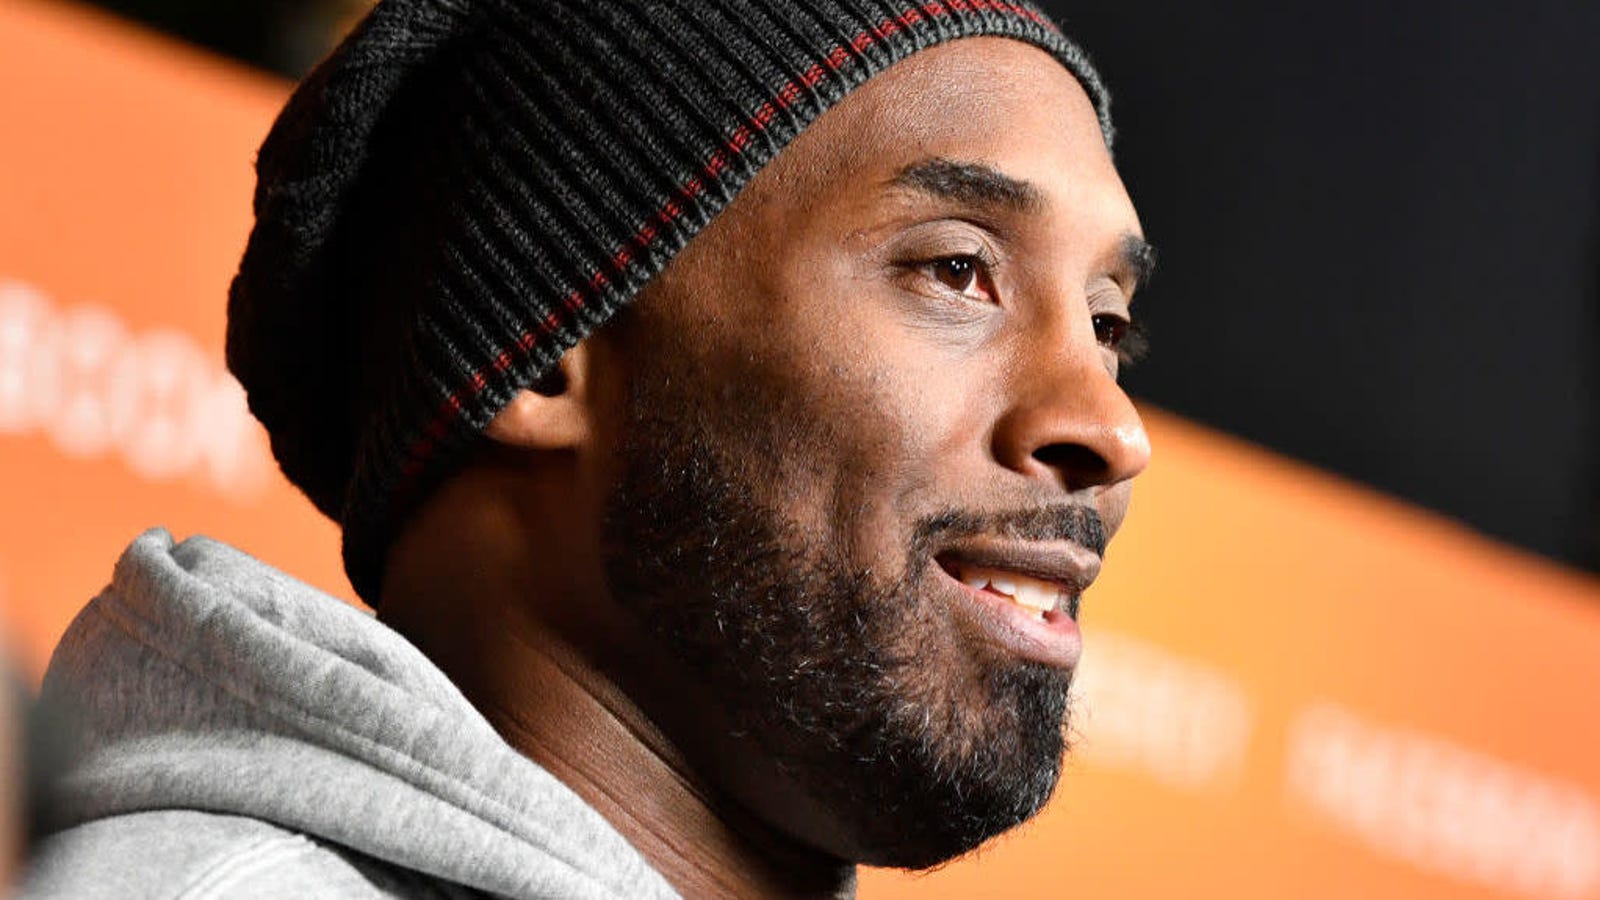 Kobe Bryant Reportedly Dead in Helicopter Crash